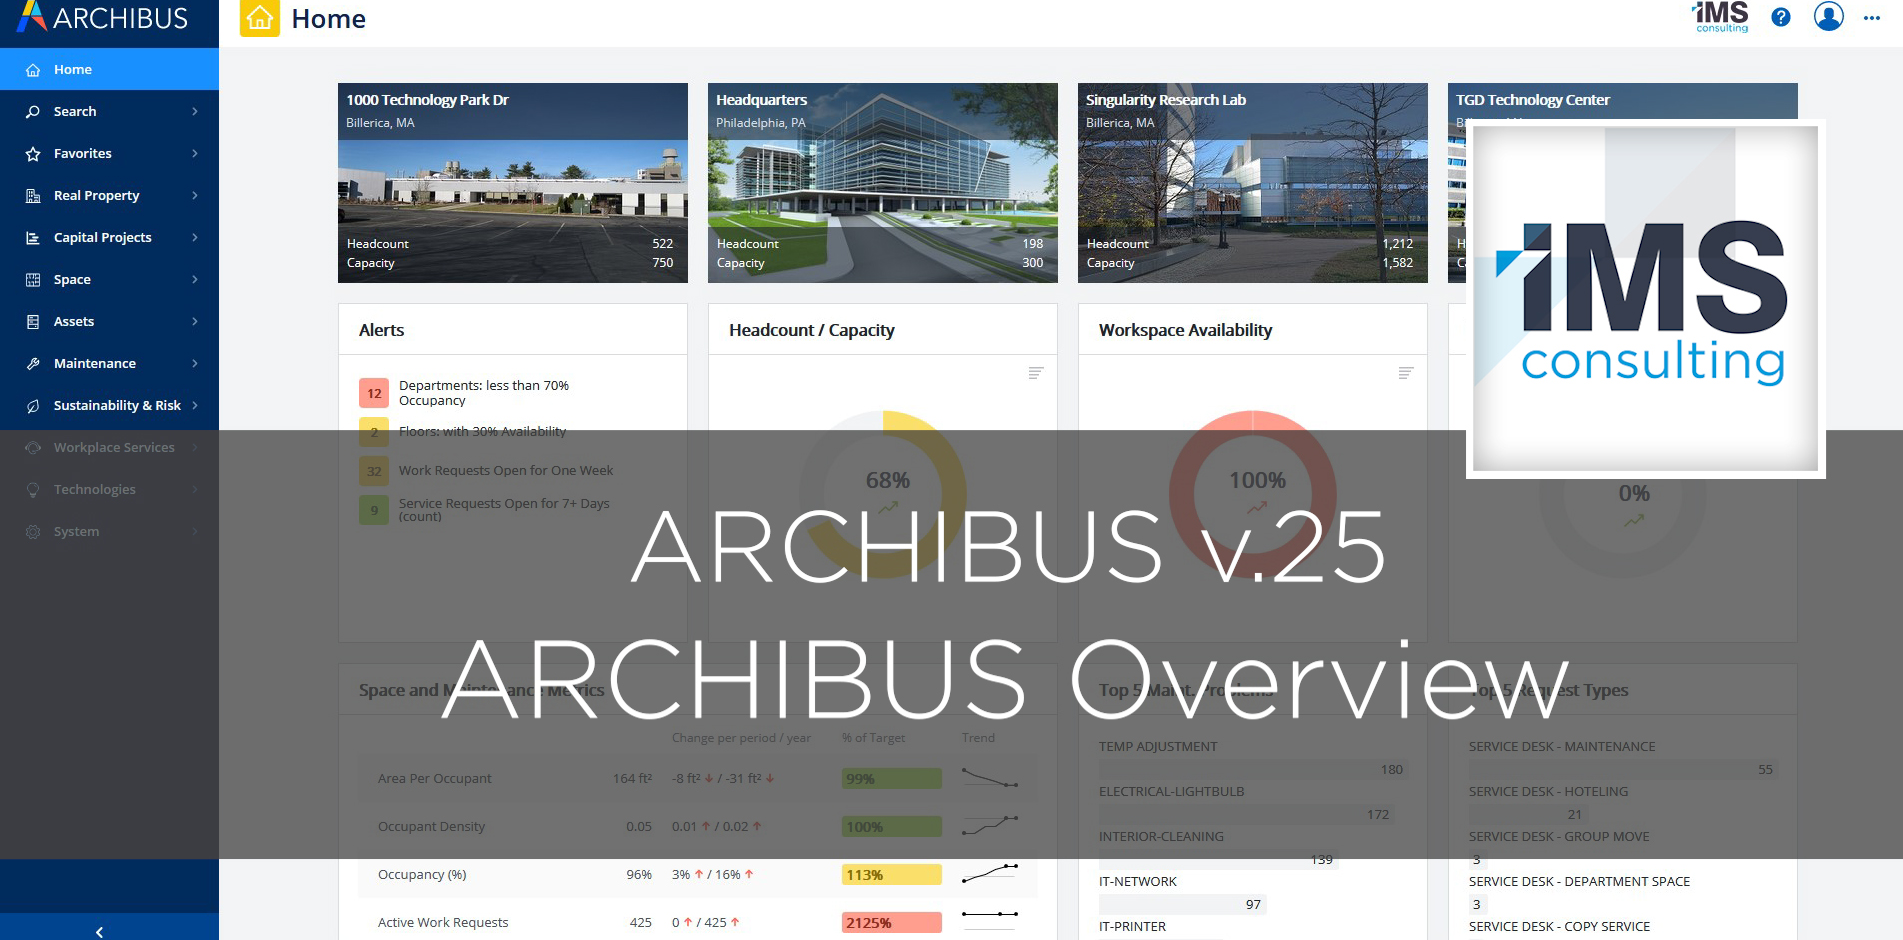 Archibus v.25 Overview - IMS Consulting